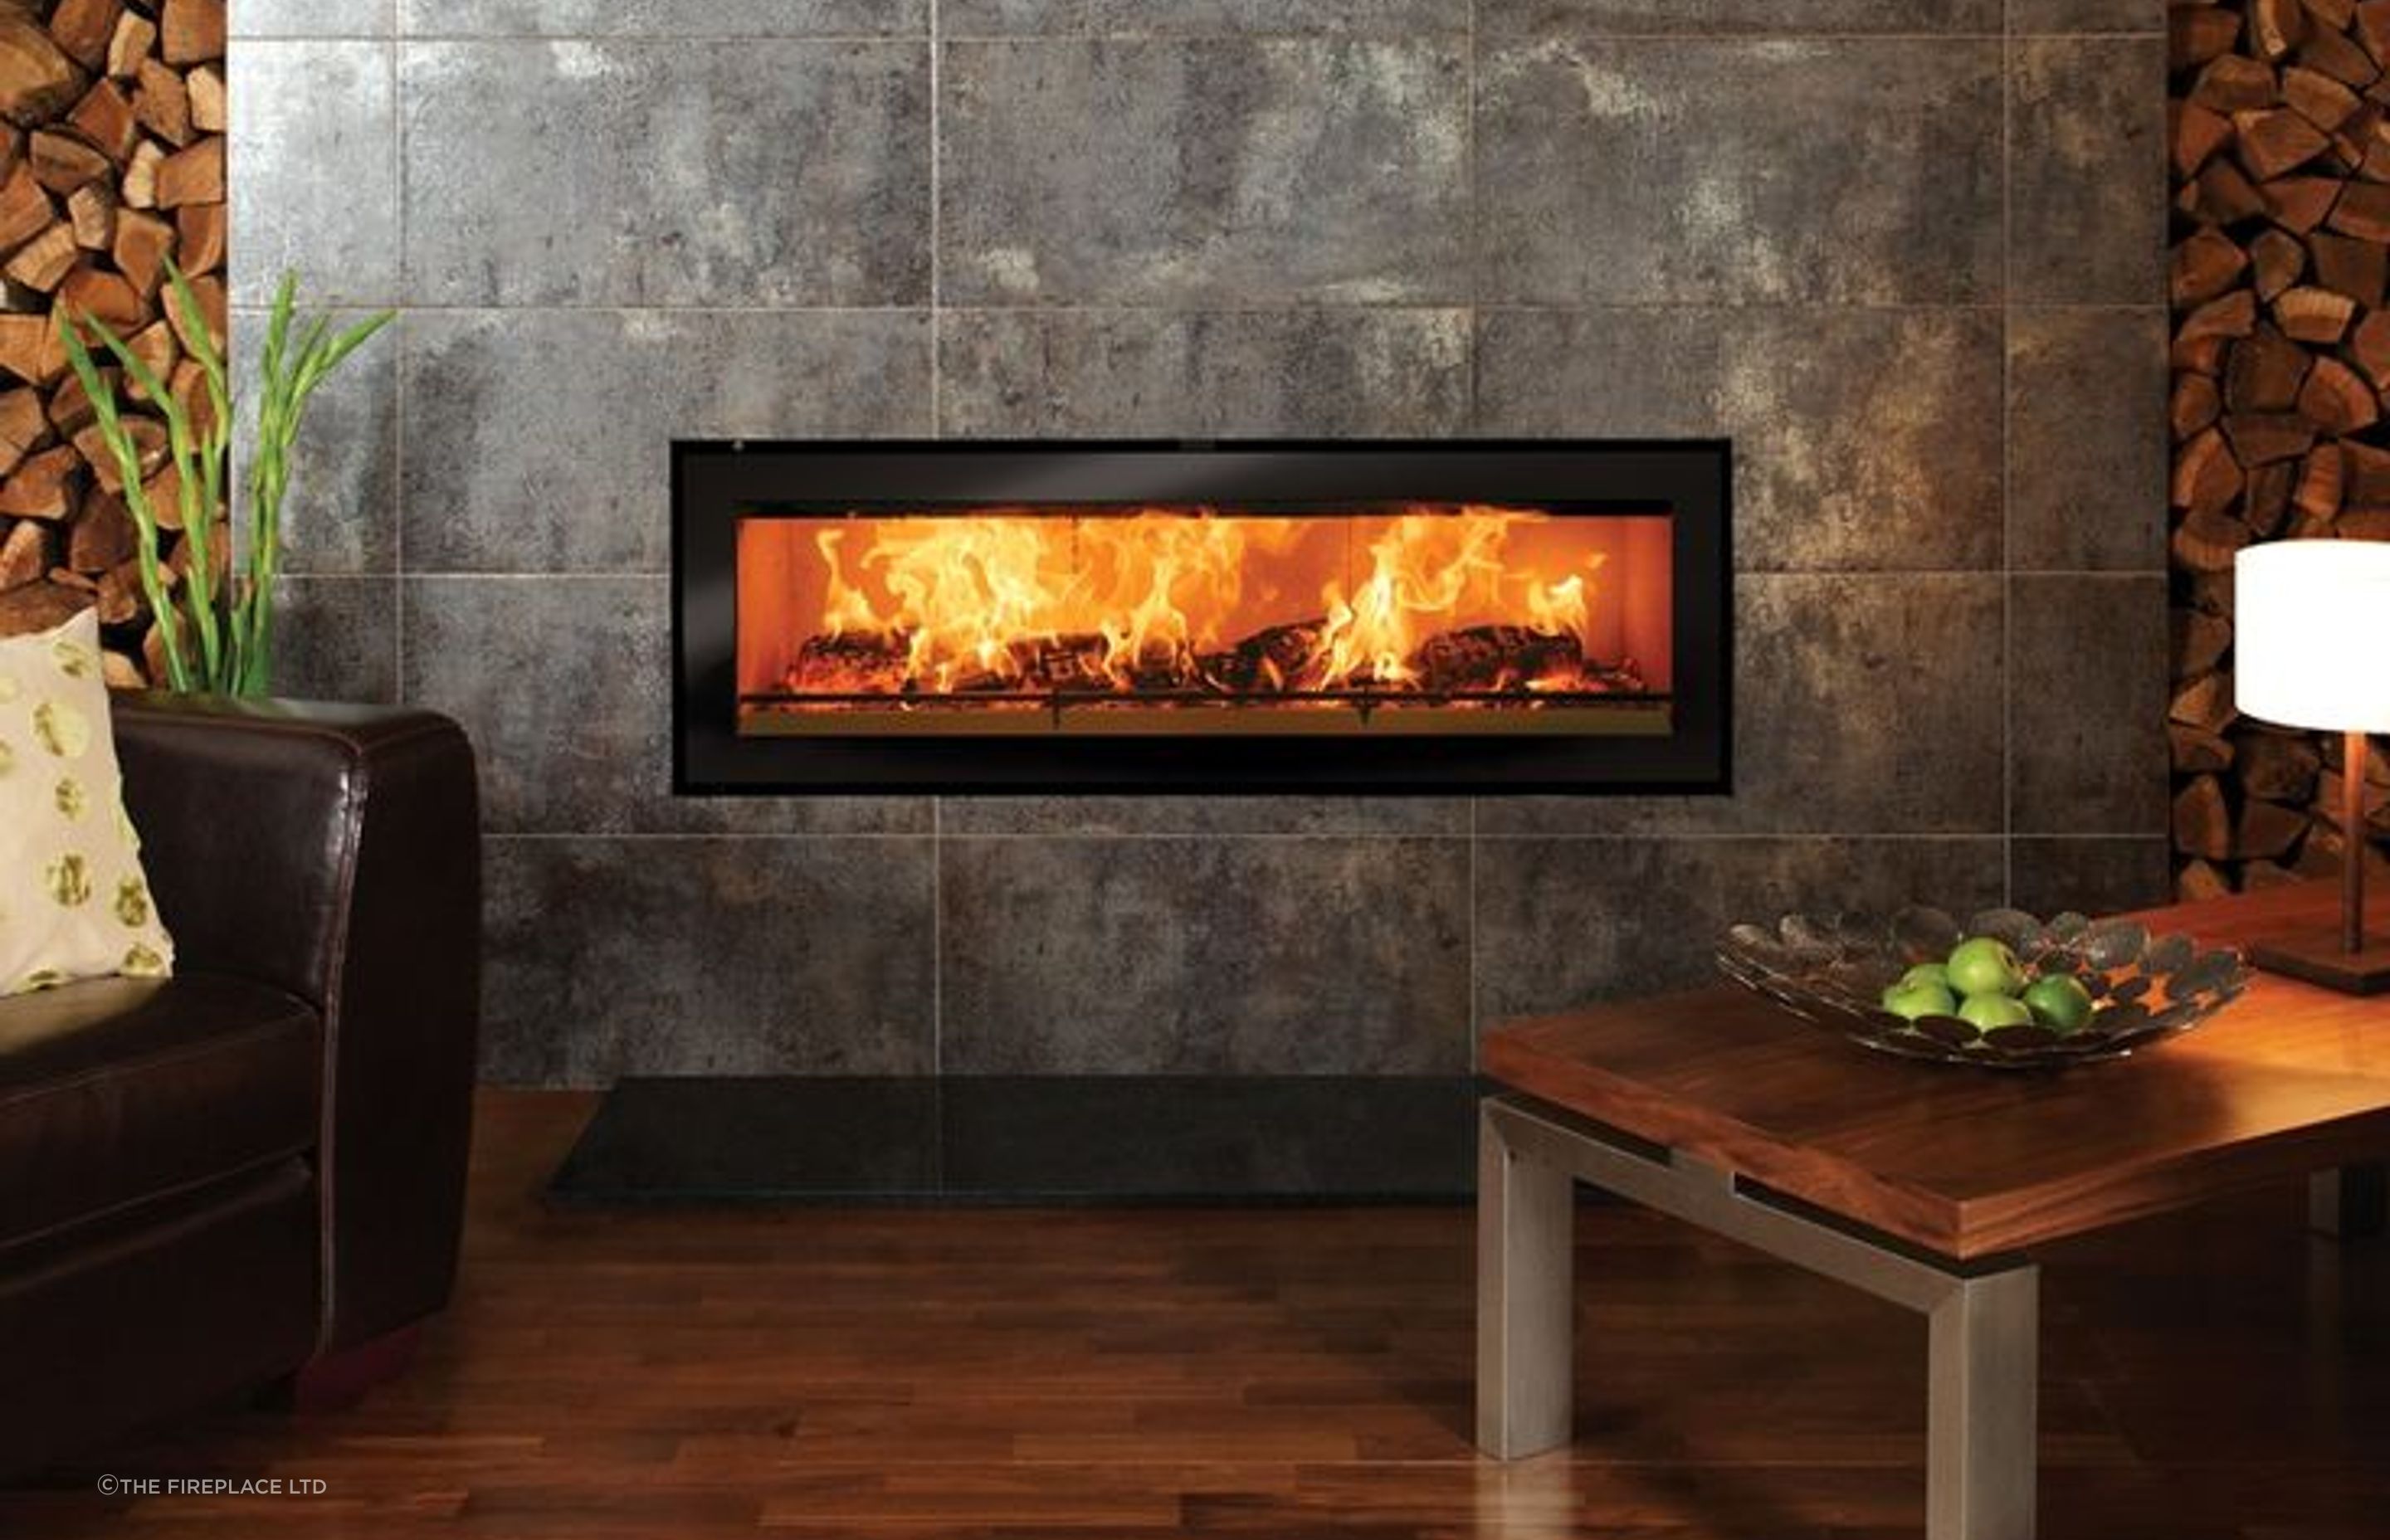 The Studio 3 provides a panoramic view of the shimmering flames and glowing logs.